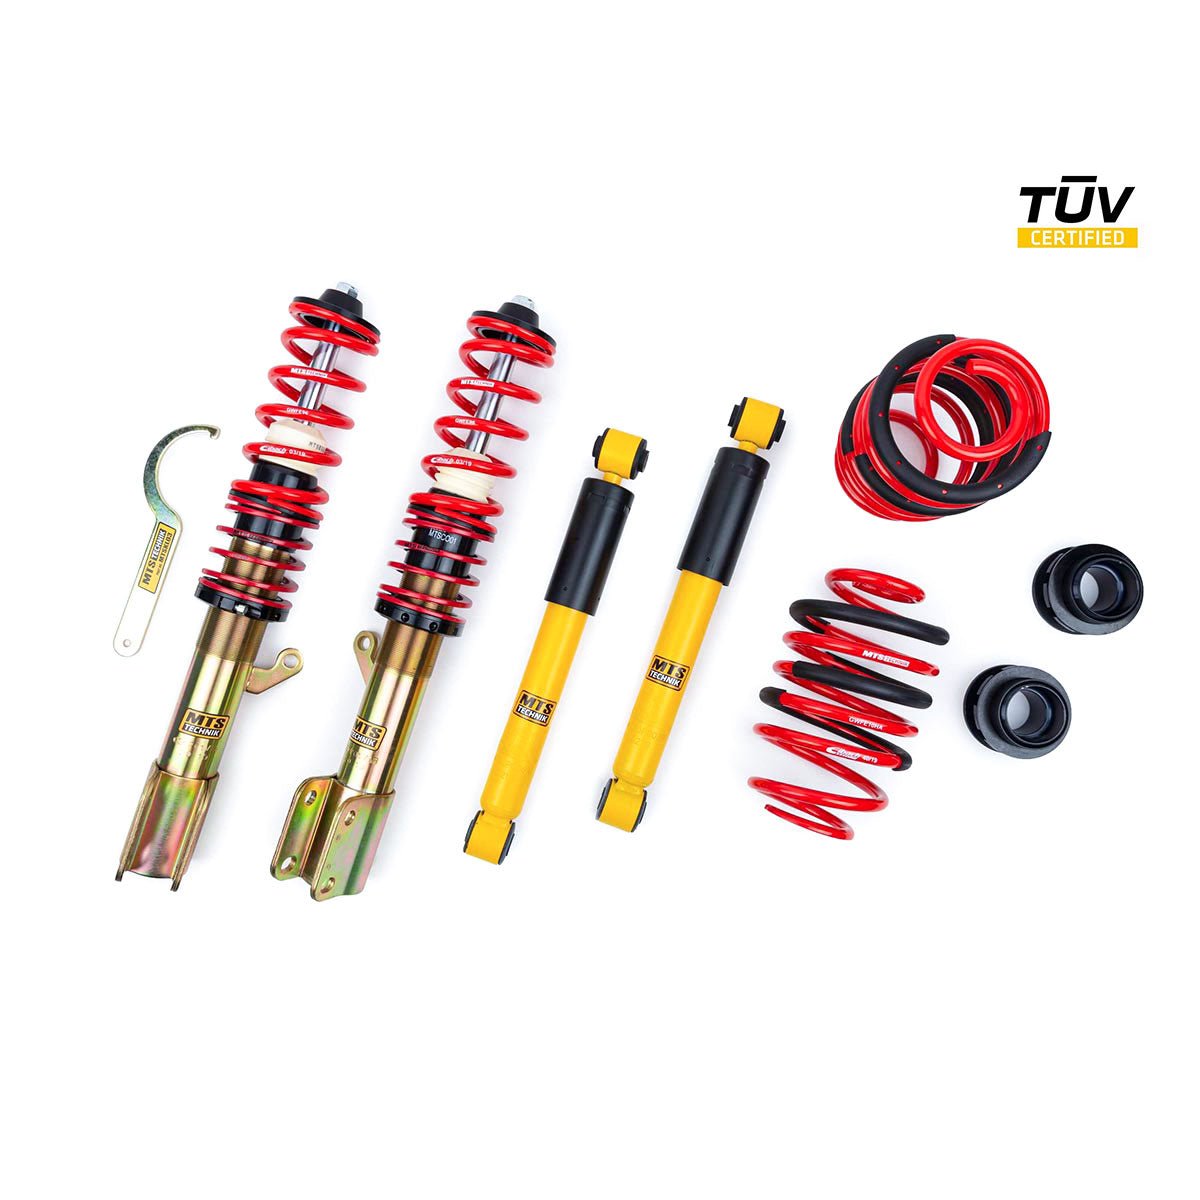 MTS TECHNIK coilover kit STREET Opel Astra G Coupe (with TÜV) - PARTS33 GmbH